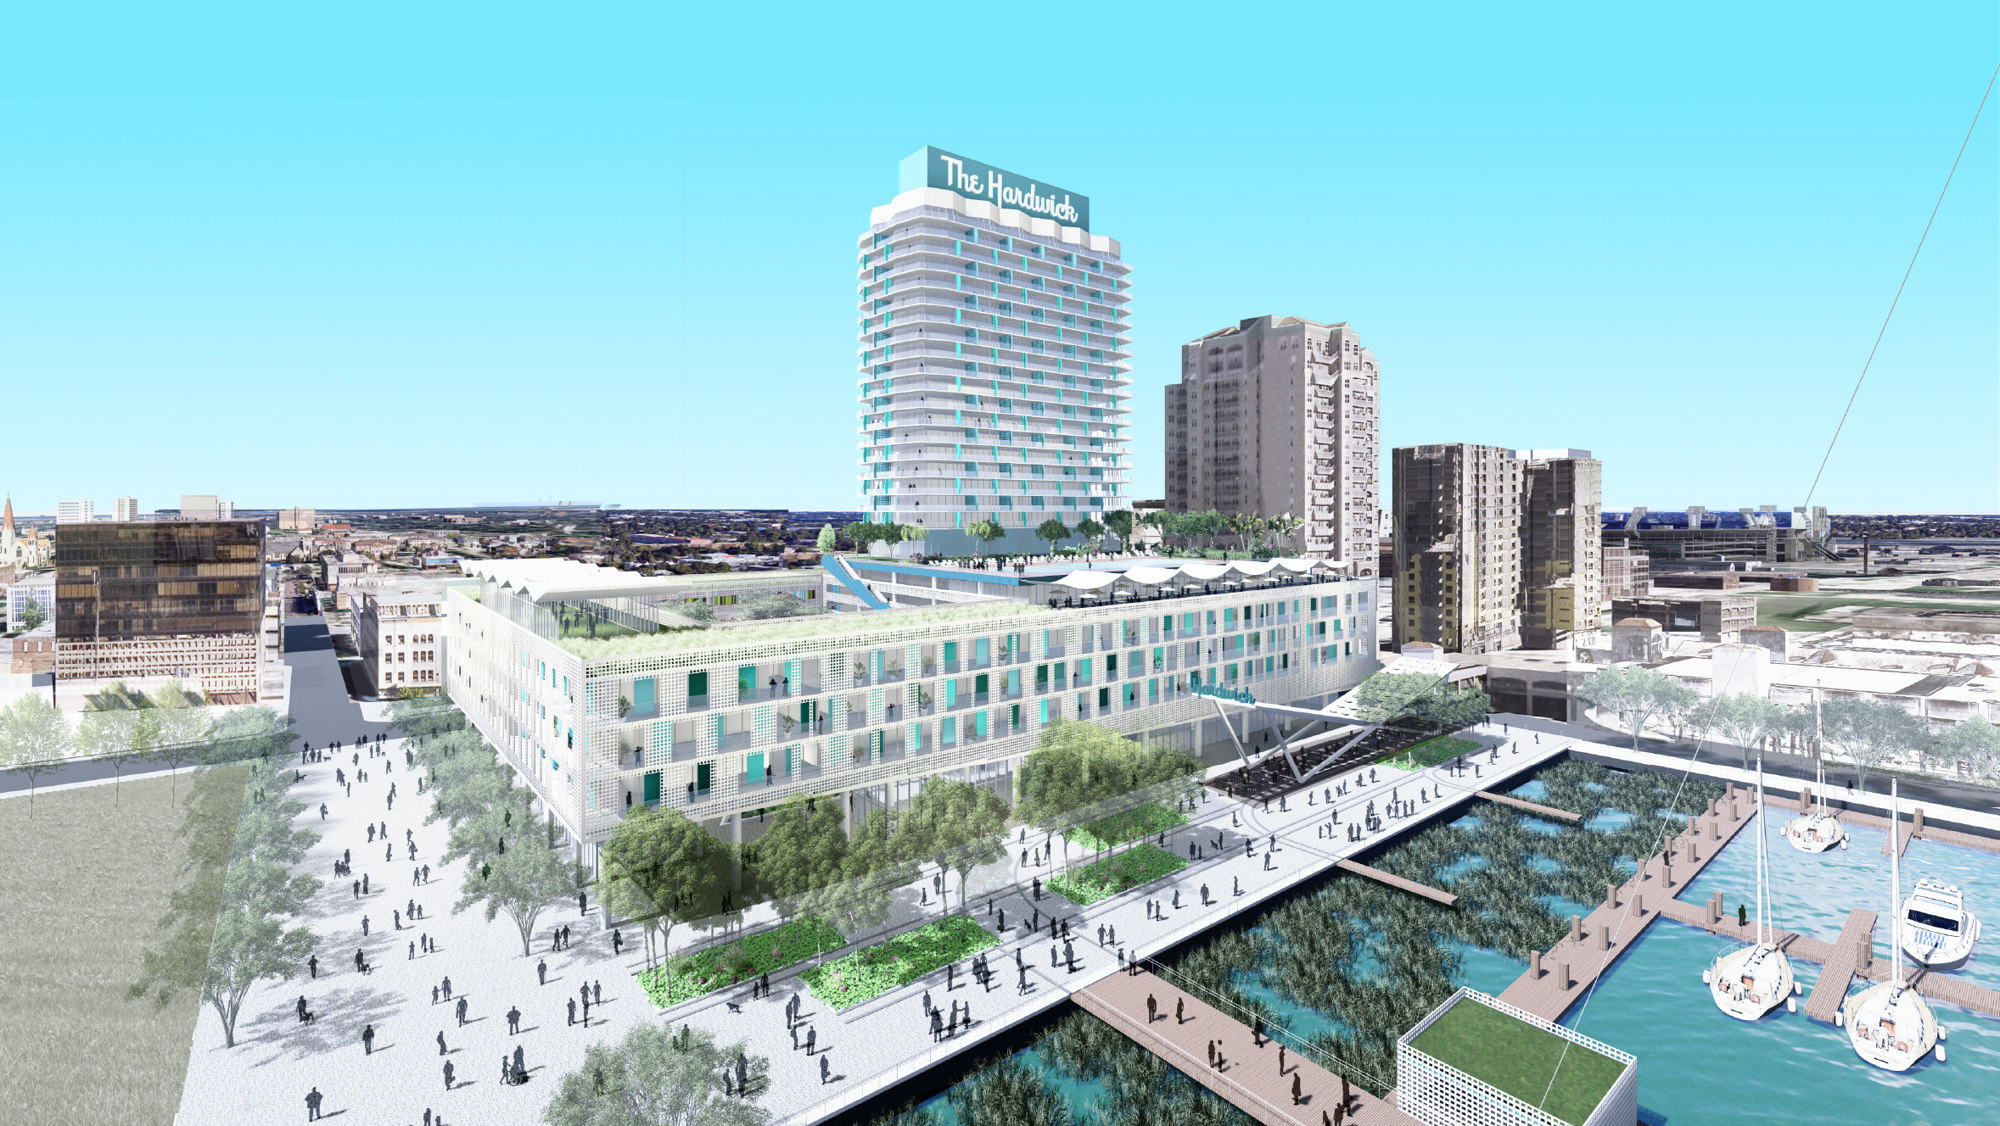 The DIA board voted 6-0 on Jan. 19 to award Carter the 2.4-acre riverfront parcel at 330 E. Bay St.